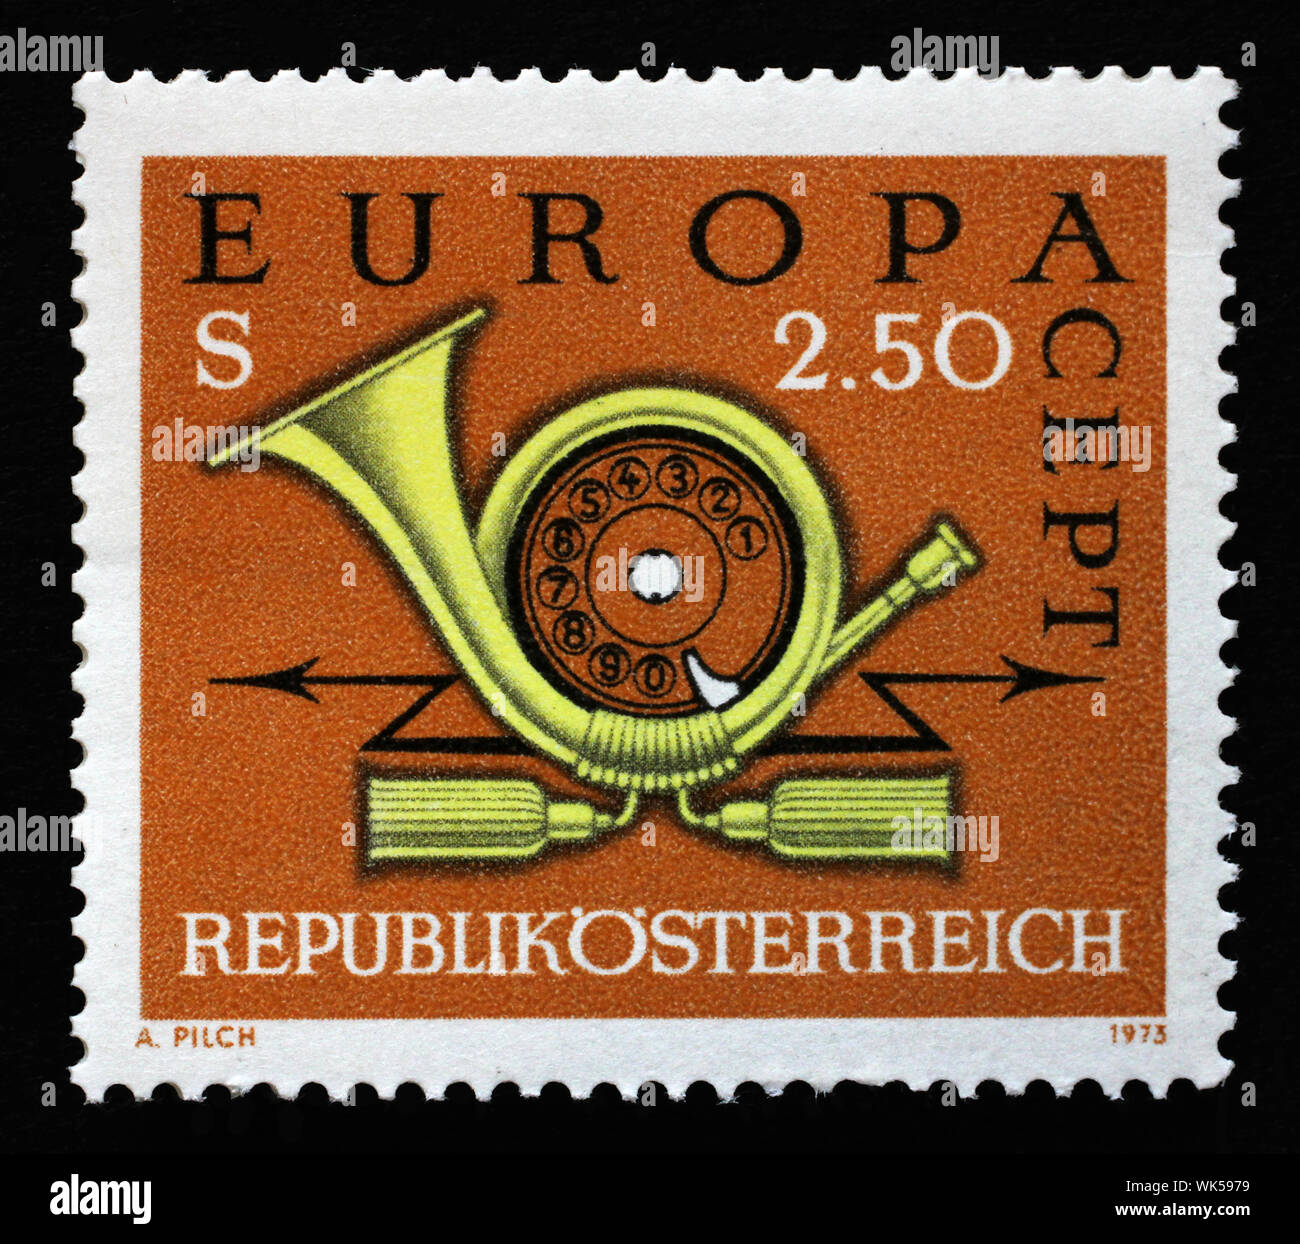 Stamp printed in Austria, shows the Post Horn and Telephone, circa 1973. Stock Photo